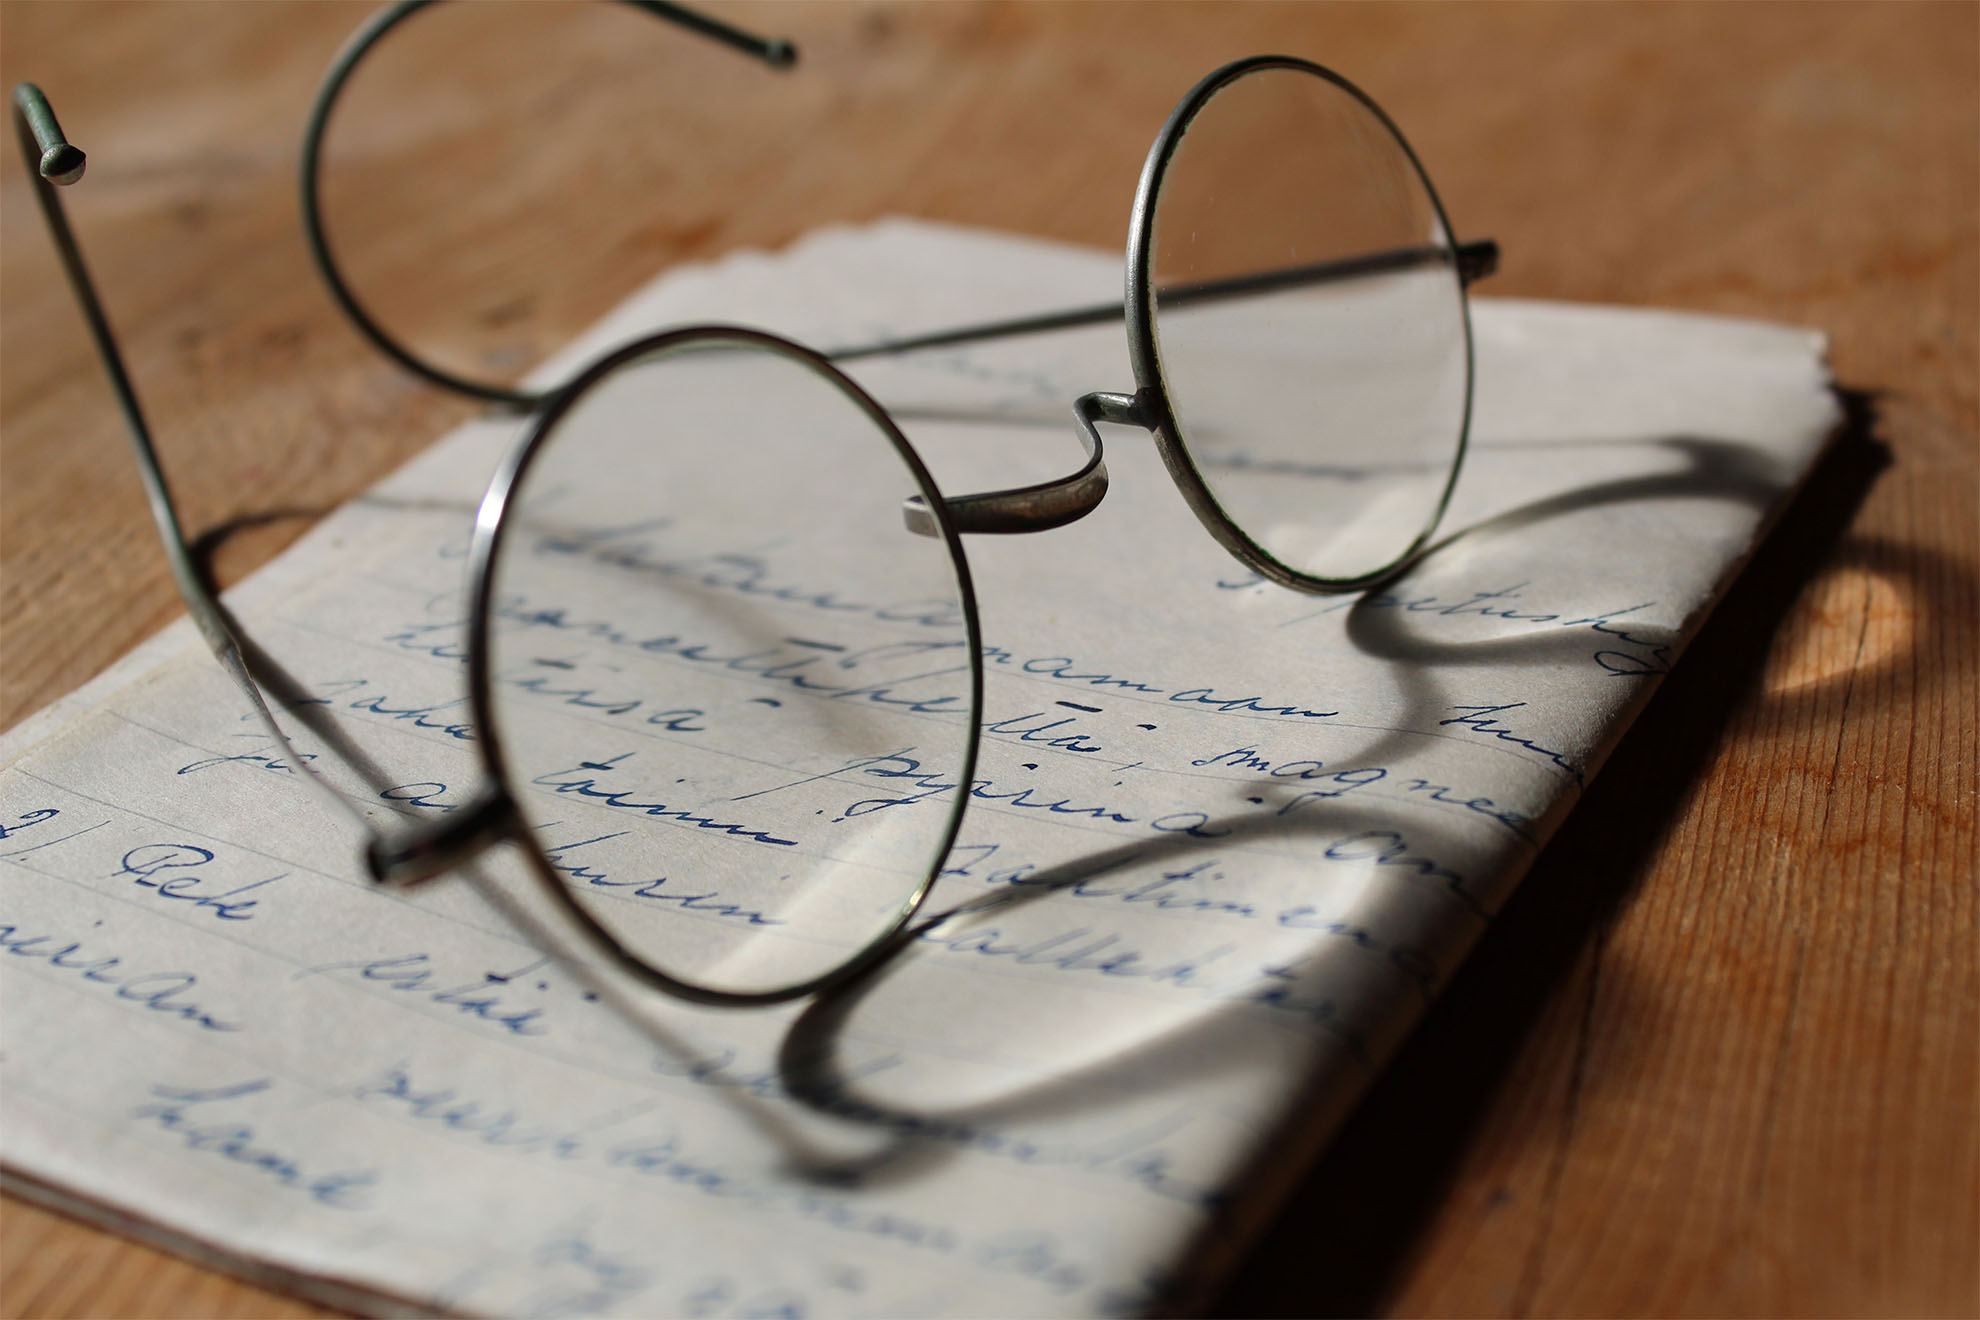 A pair of glasses resting on a handwritten letter